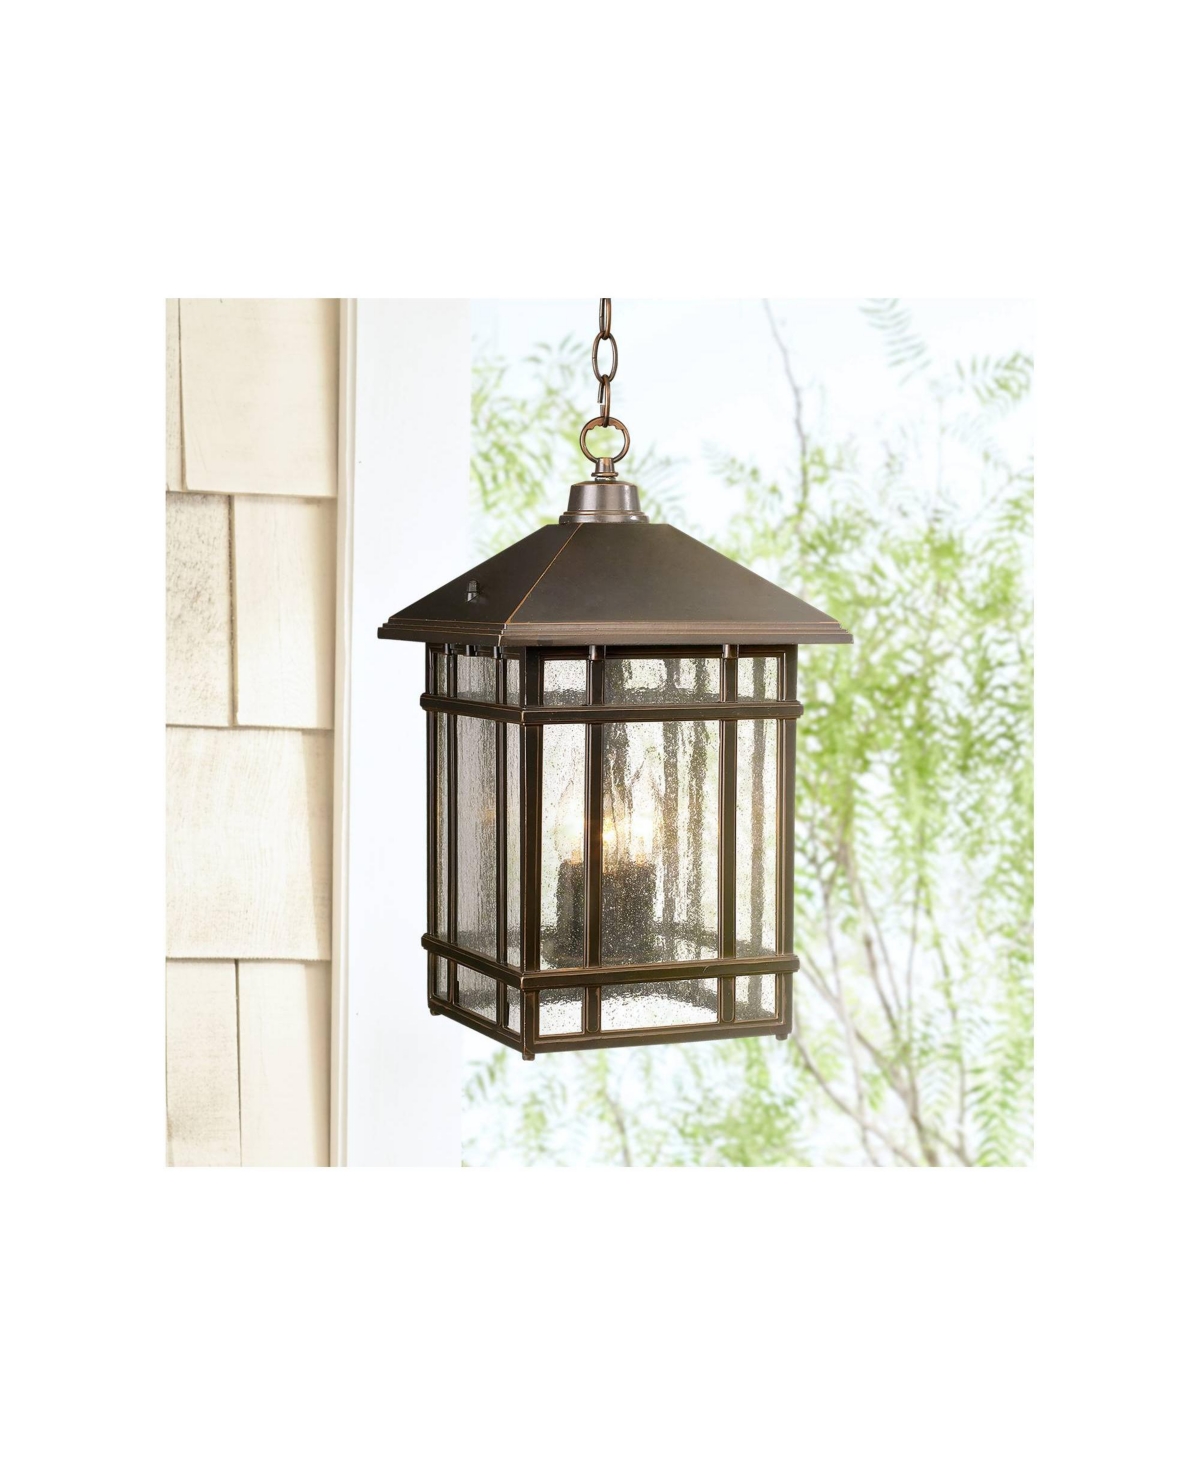 Jardin du Jour Sierra Craftsman Art Deco Outdoor Hanging Ceiling Light Rubbed Bronze 16 1/2" Frosted Seeded Glass Panels Damp Rated for